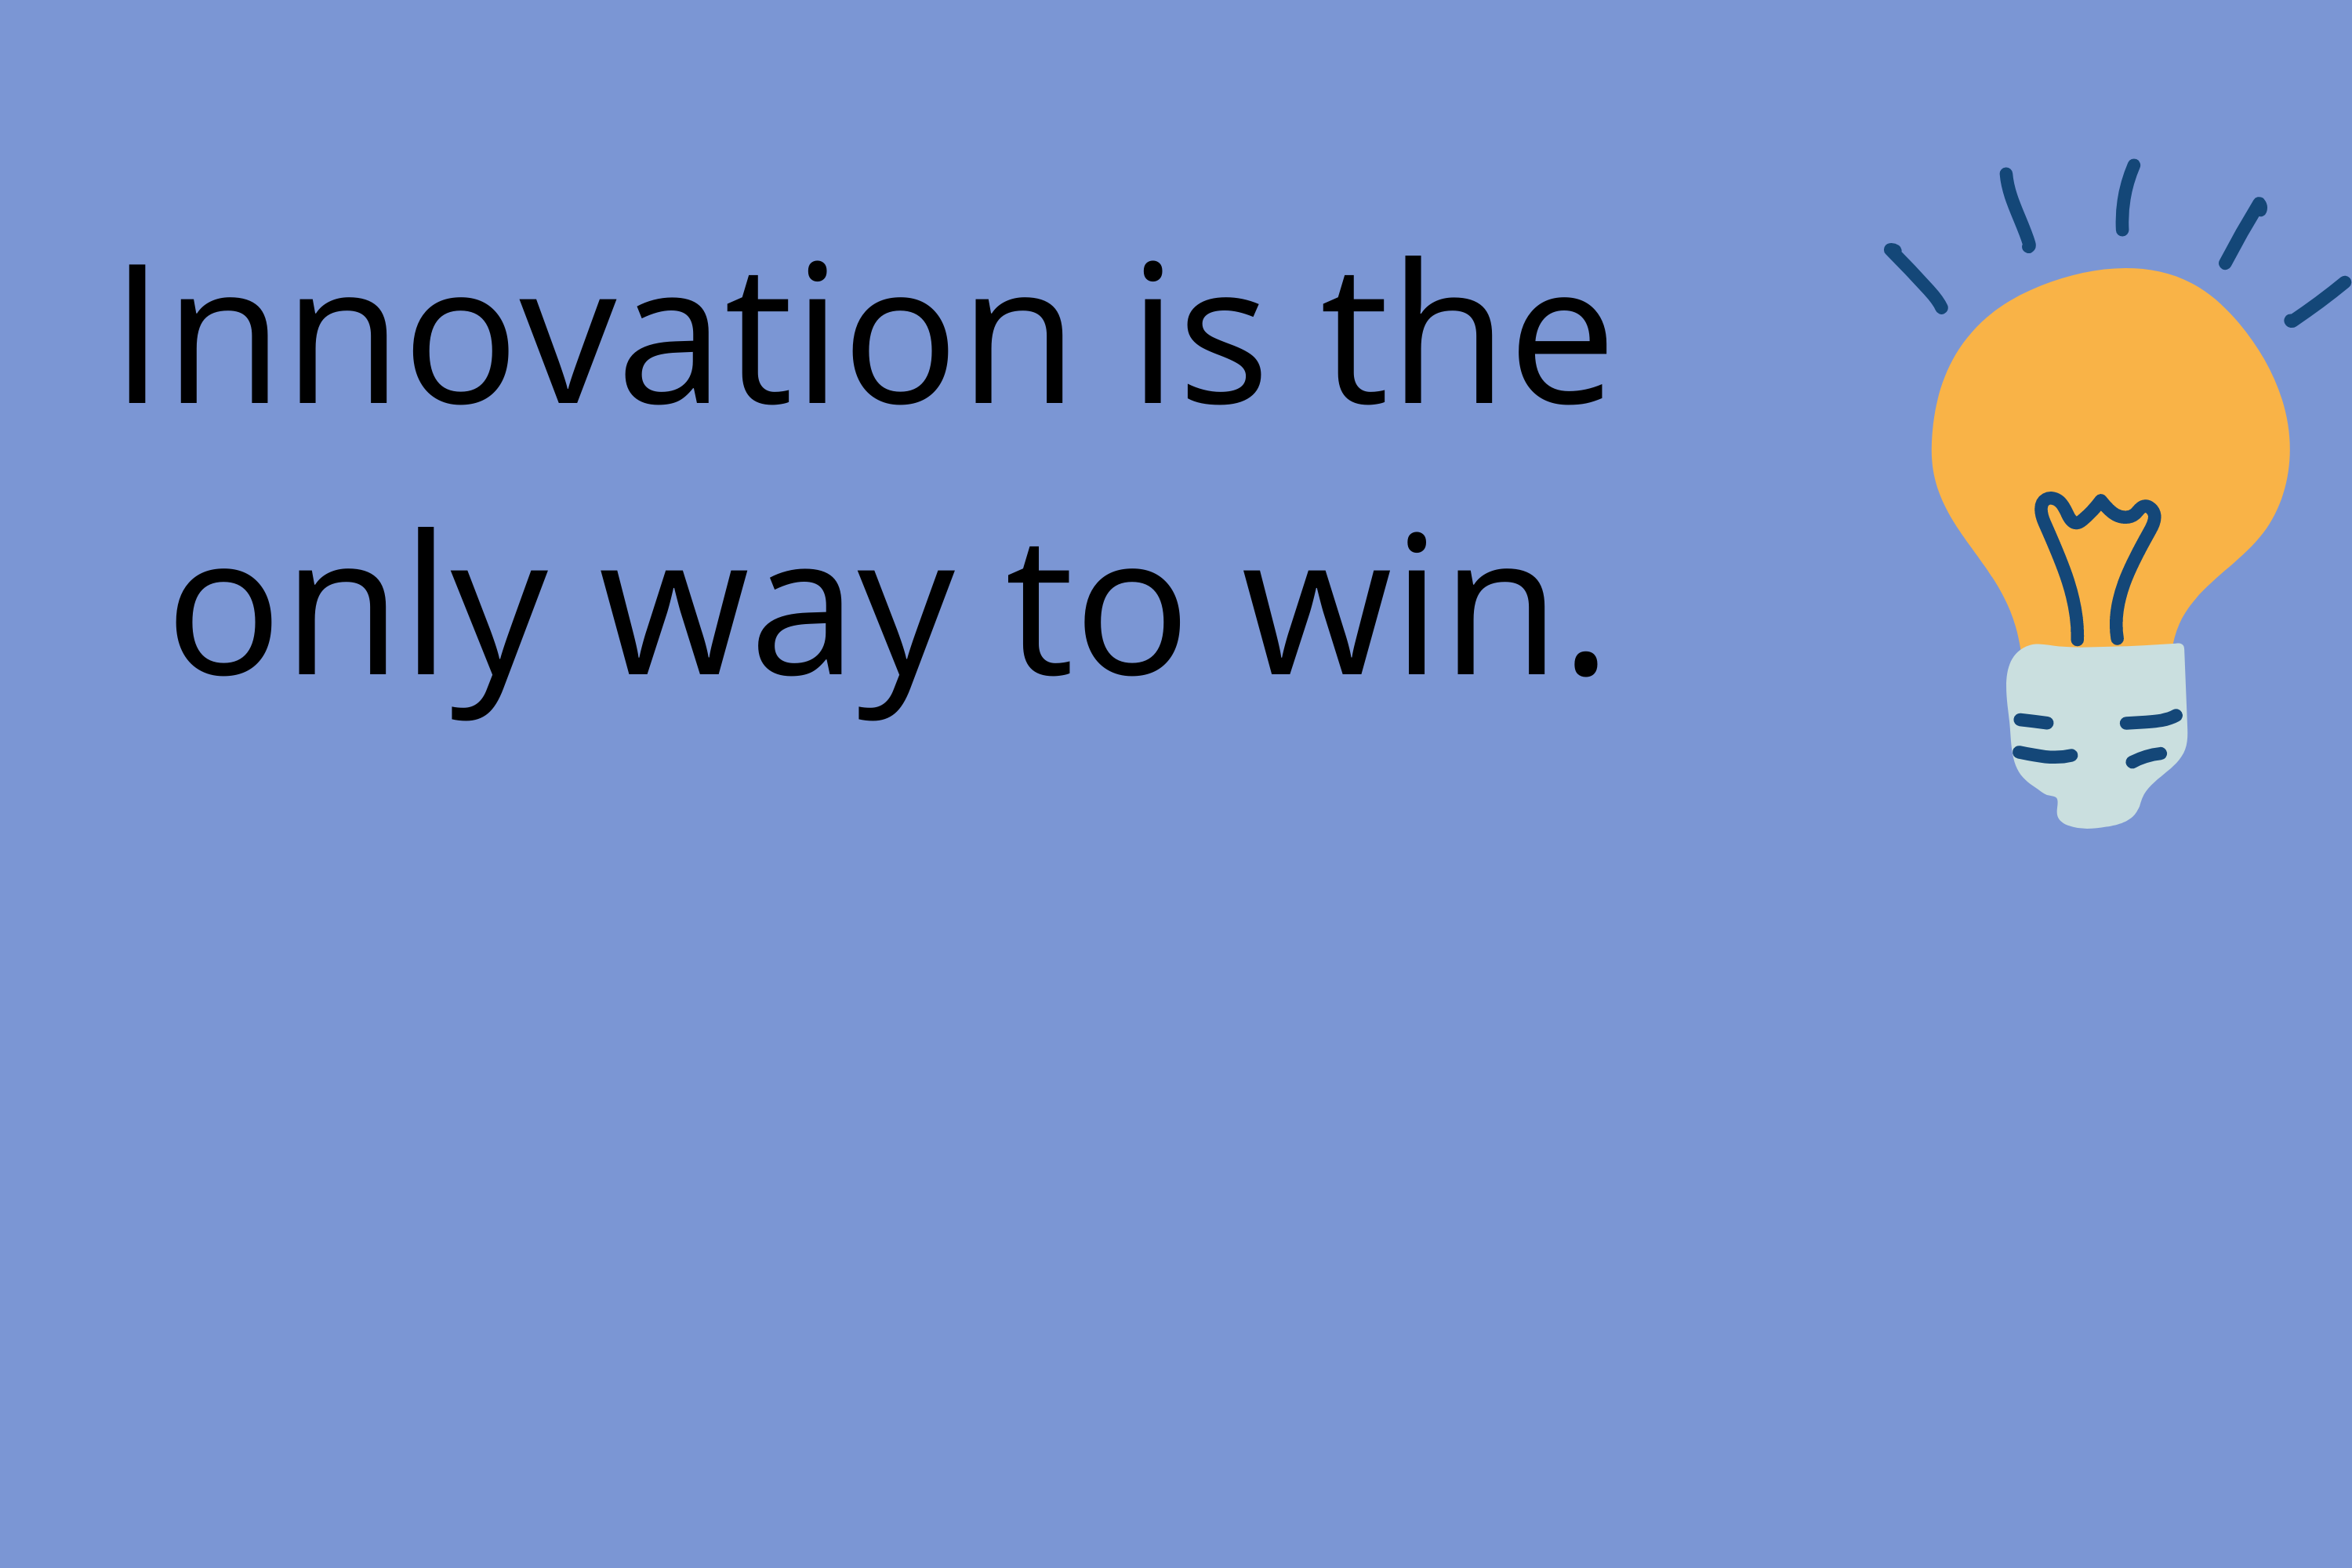 Innovation is the only way to win